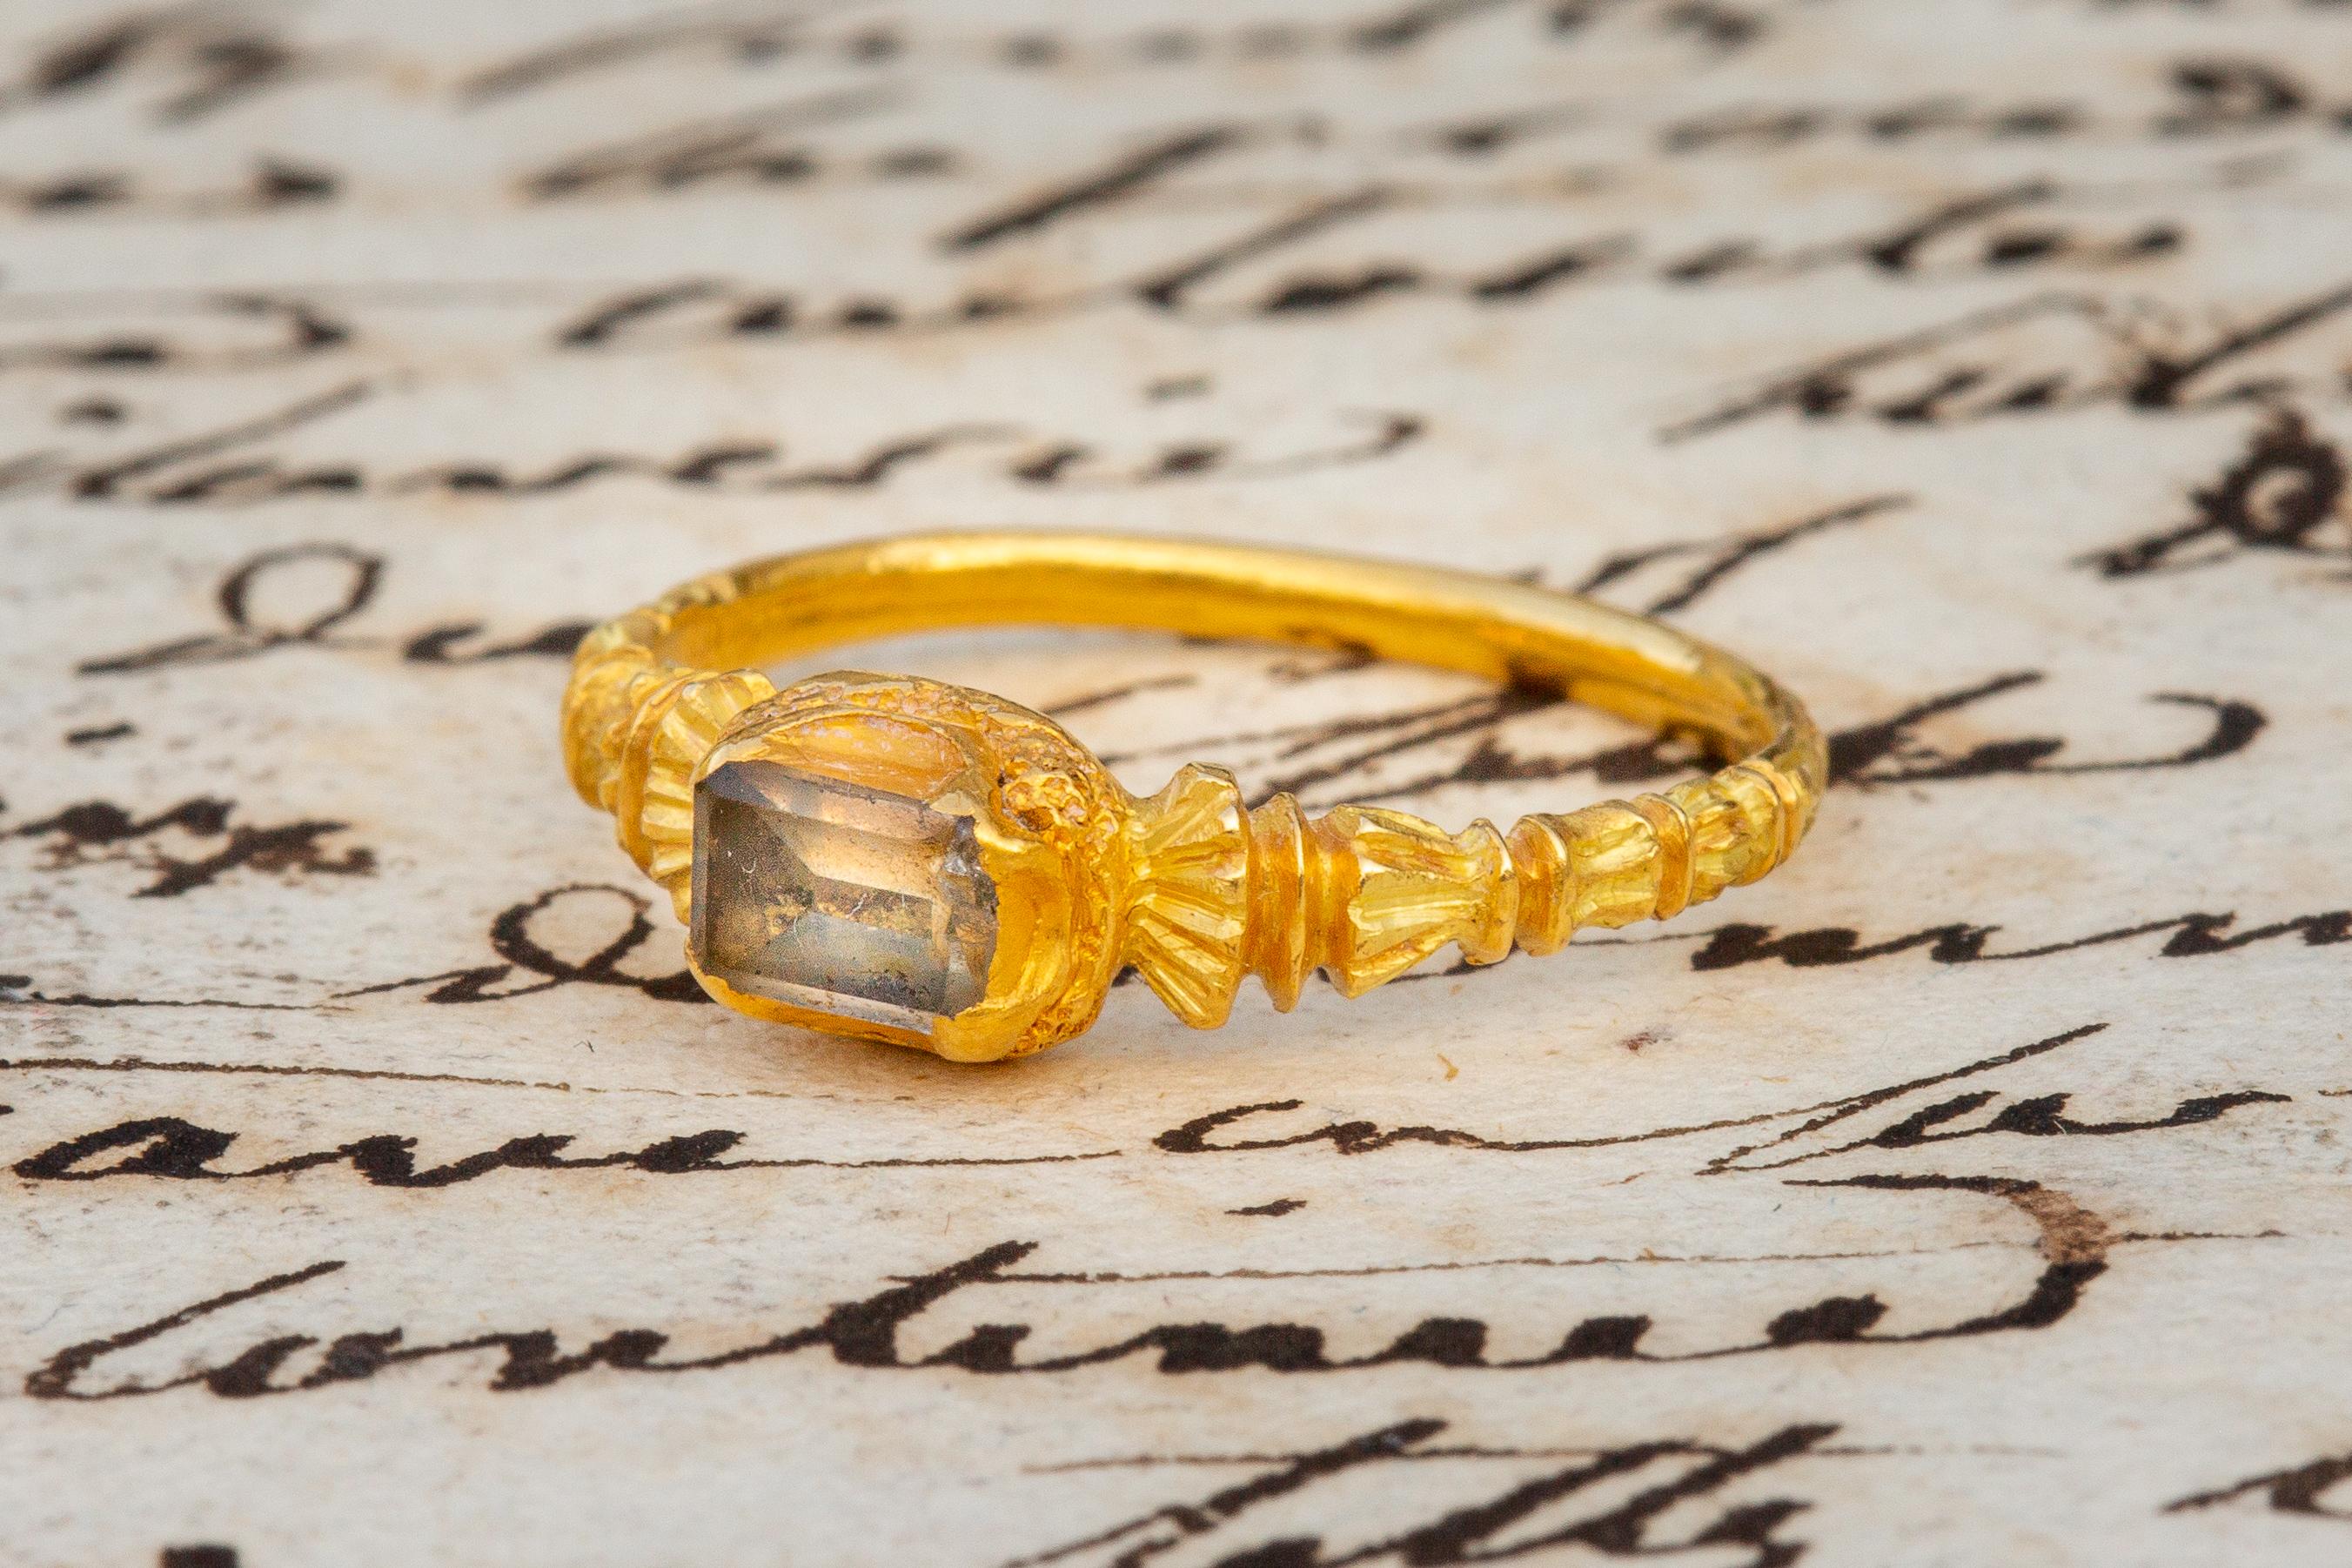 A stunning example of a European renaissance ring dating to 1550-1600! A table-cut rock crystal is mounted in a closed back rub over setting. The quatrefoil bezel is cuffed with a recessed crescent on each side and is flanked by fantastic ornate